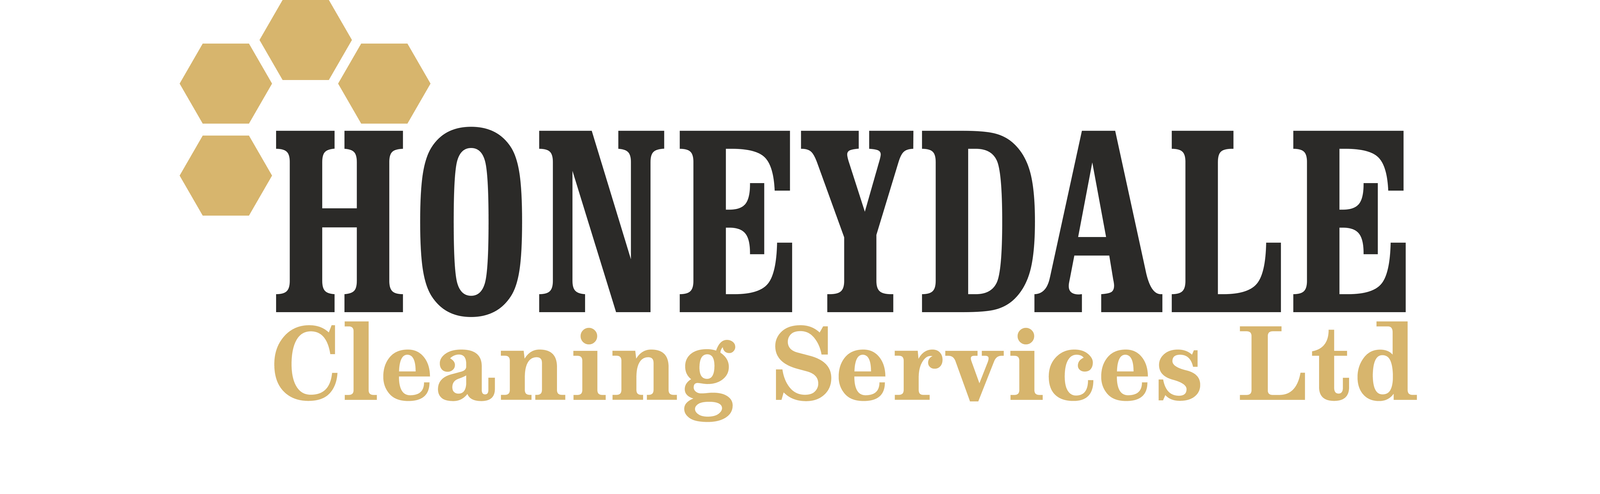 Honeydale Cleaning Services Ltd